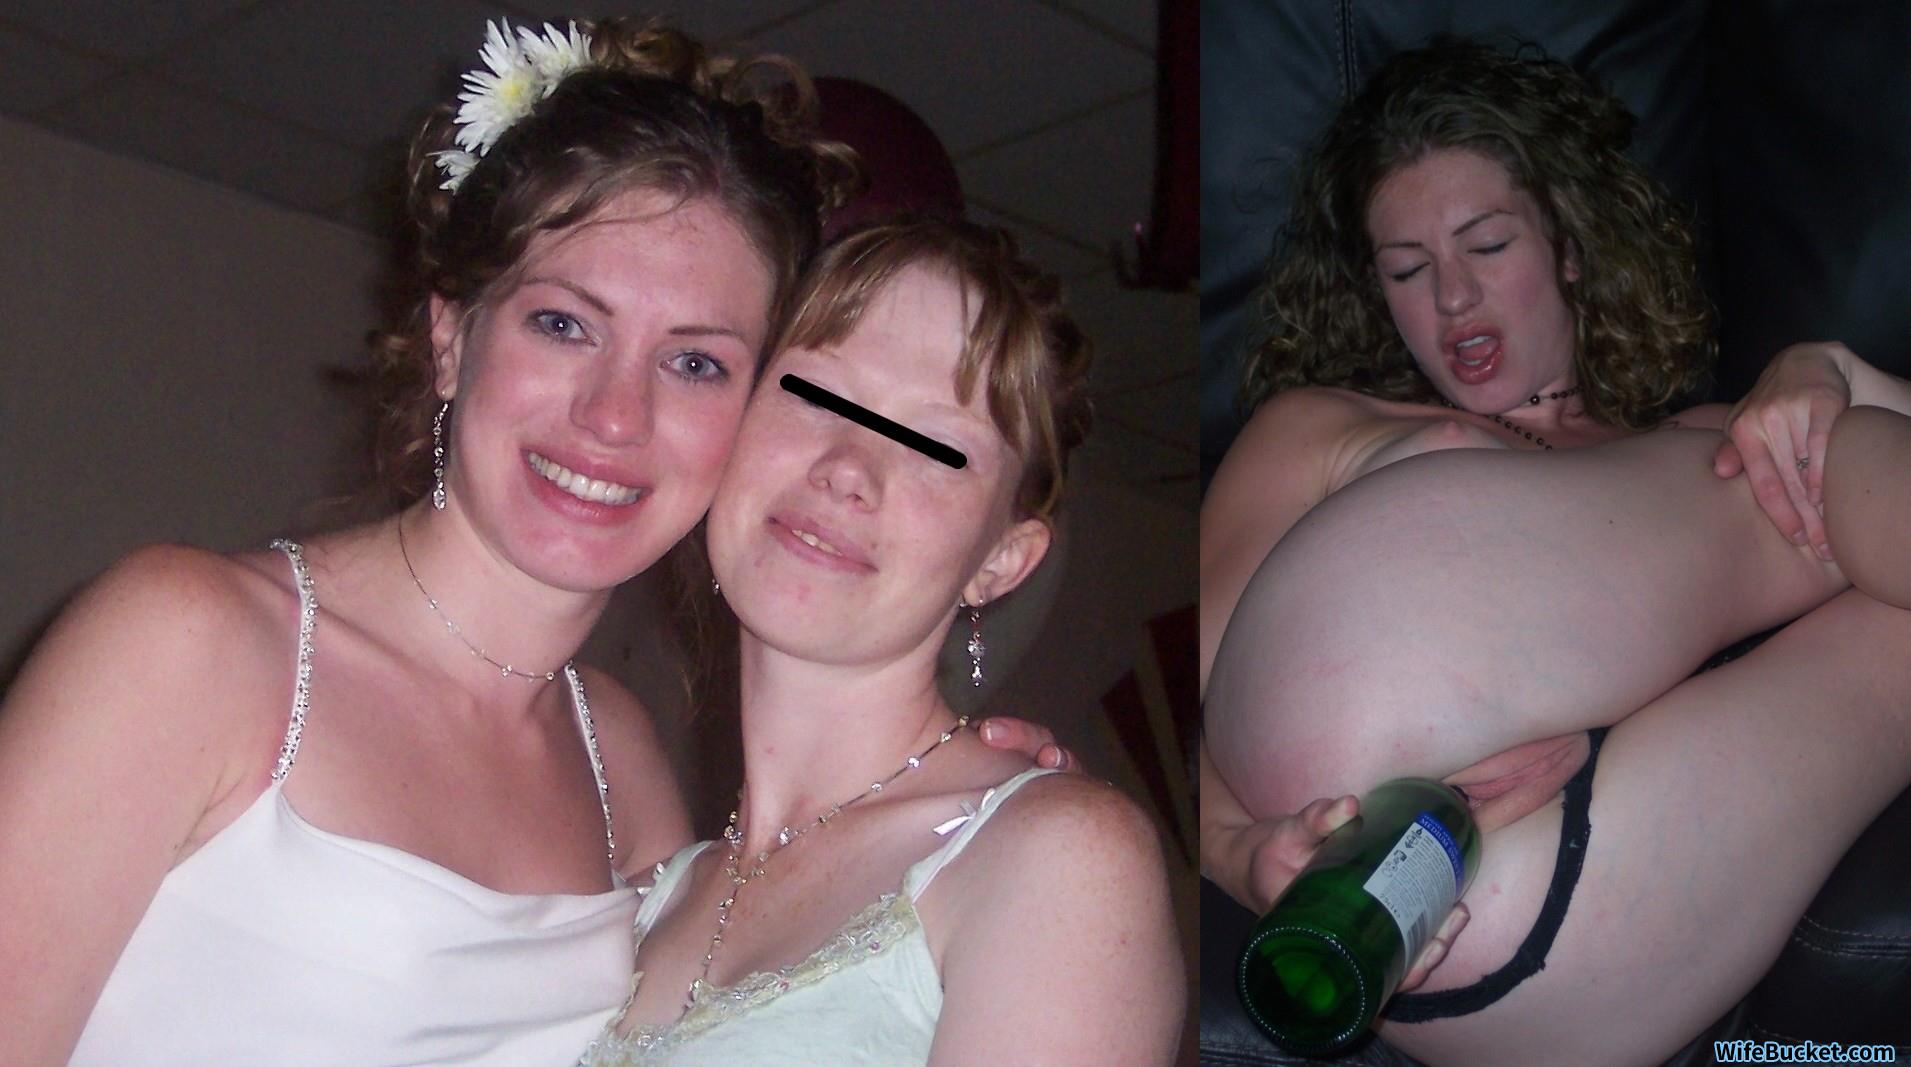 1911px x 1067px - before-after pics â€“ WifeBucket | Offical MILF Blog